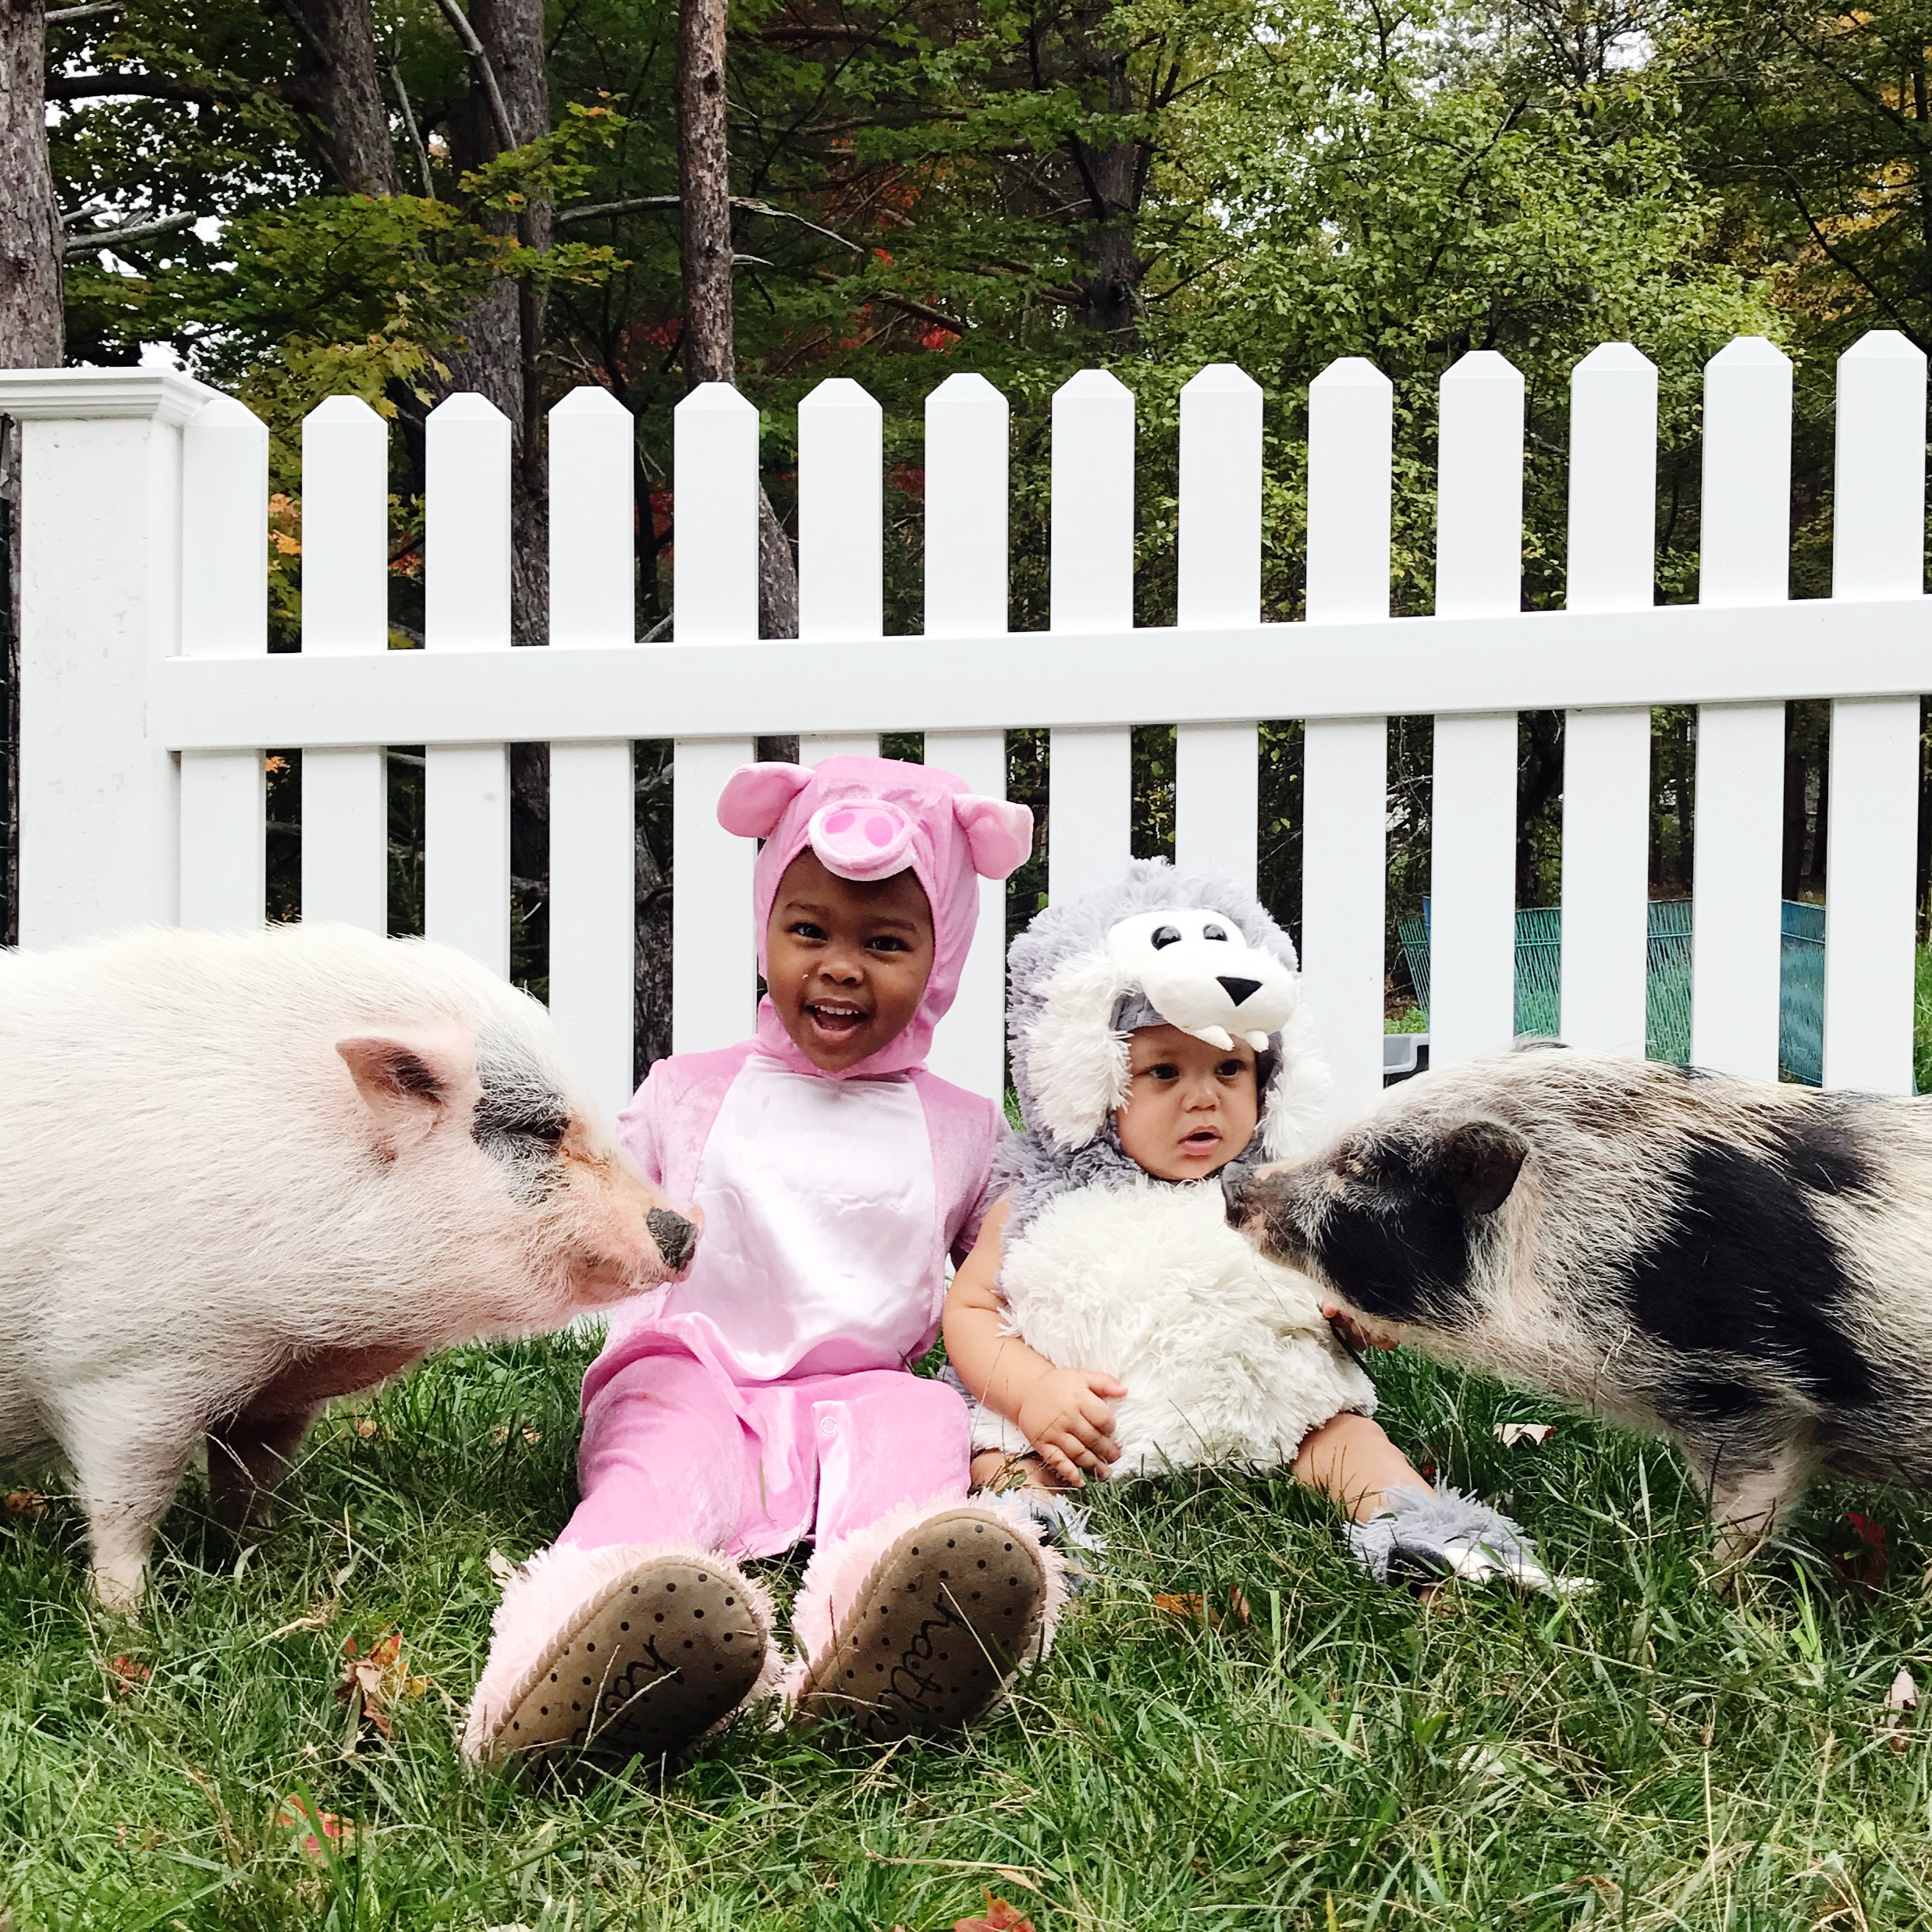 PHOTO: Lindsey Bonnice, a Pennsylvania photographer, captures her children dressing up for Halloween with their farm animal pets.